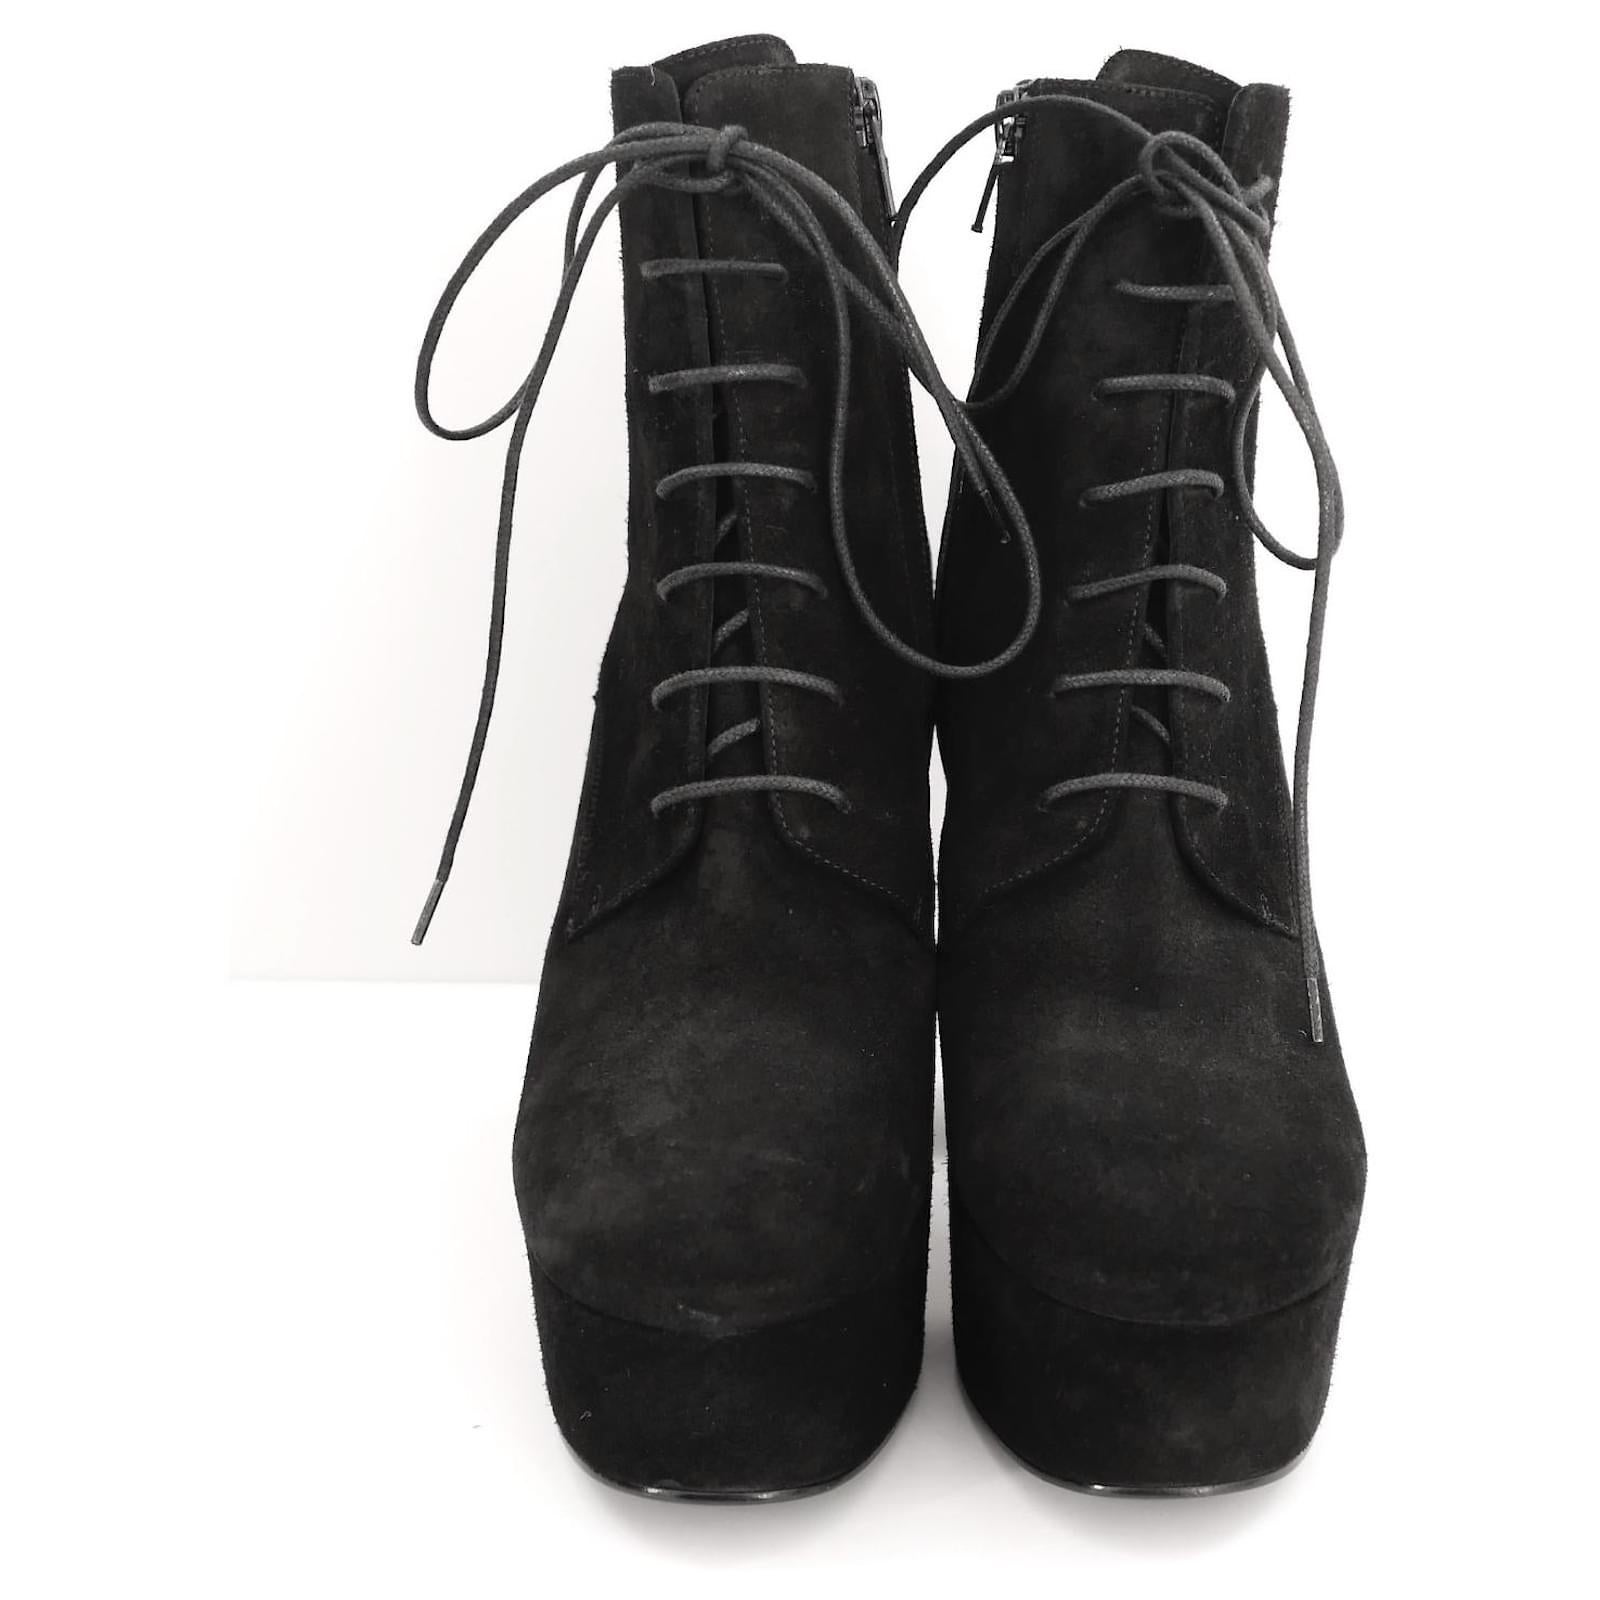 Fabulous Saint Laurent Candy platform ankle boots - bought for $1300 and worn once. come with dustbag. Made from black suede with long laces, chunky heels and platforms and side zips. Size 36.5. Measure approx 10” heel to toe, heel 4.75” and